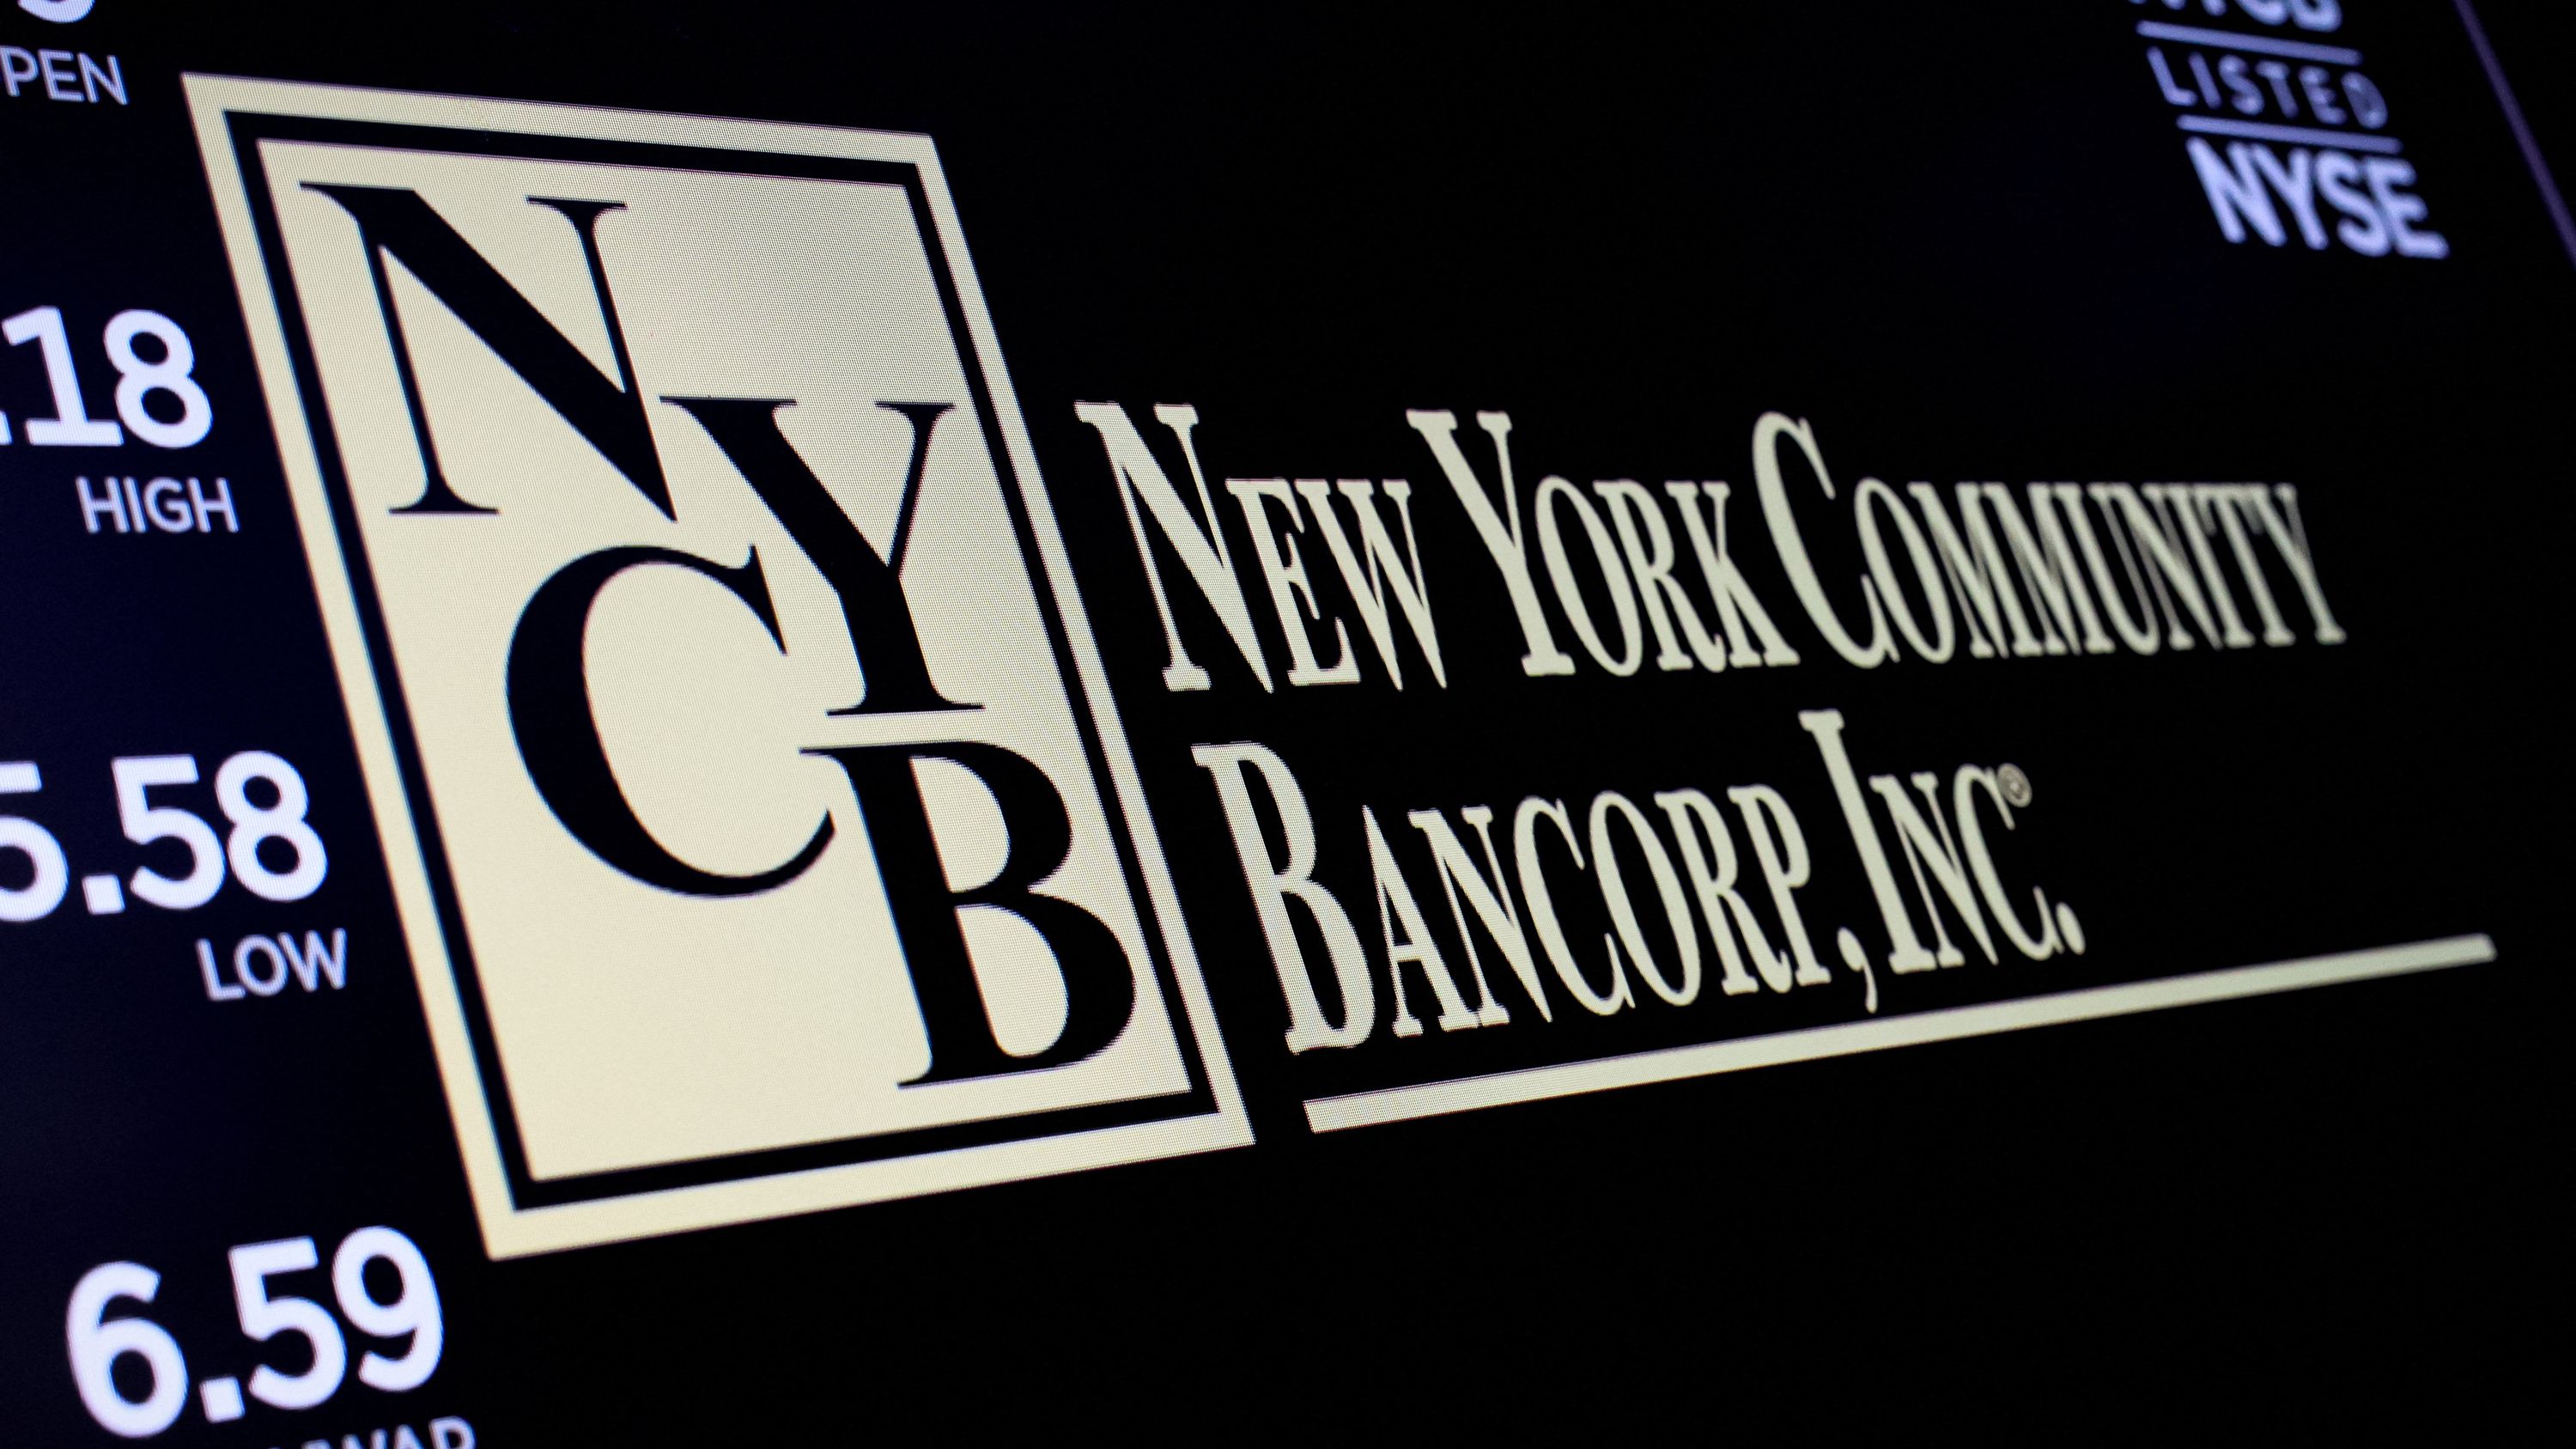 New York Community Bancorp's credit rating downgraded to junk on real estate concerns | CNN Business